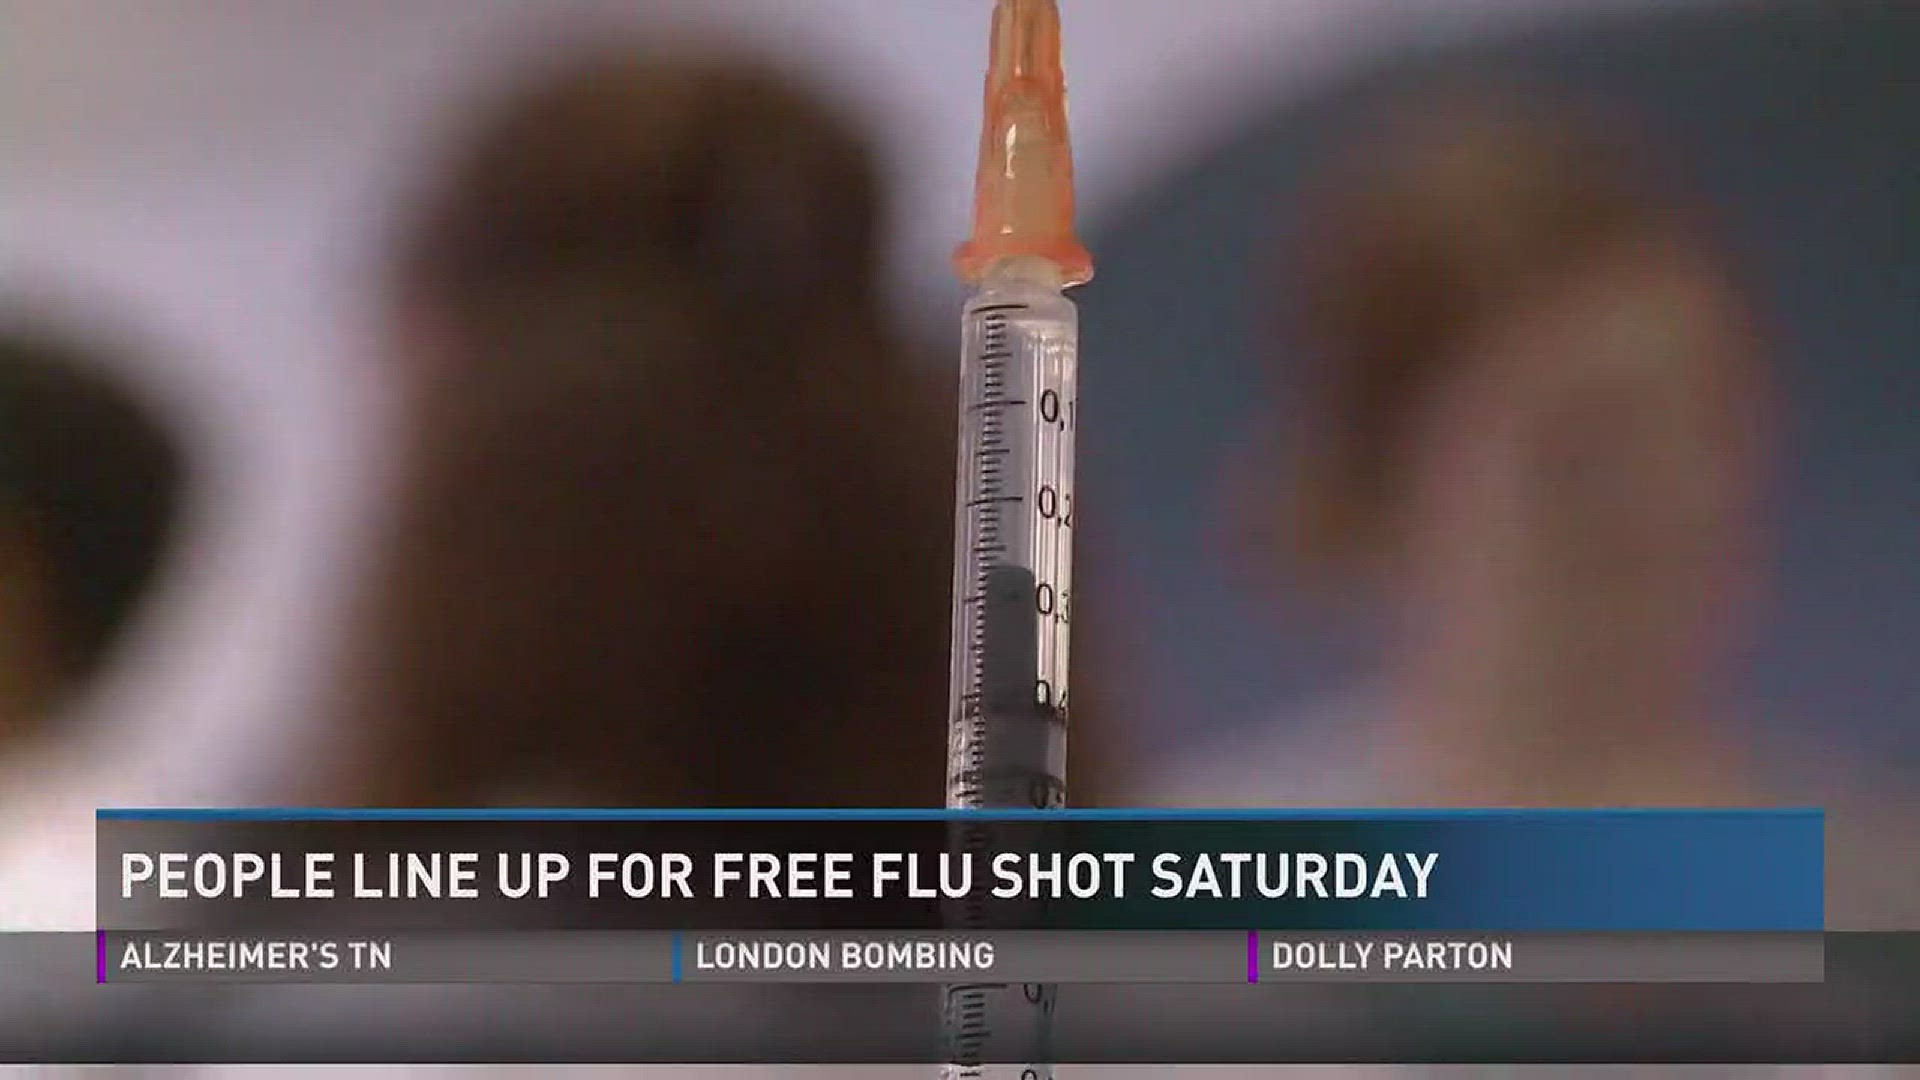 A few Knox County schools offered free flu shots to those on Saturday.